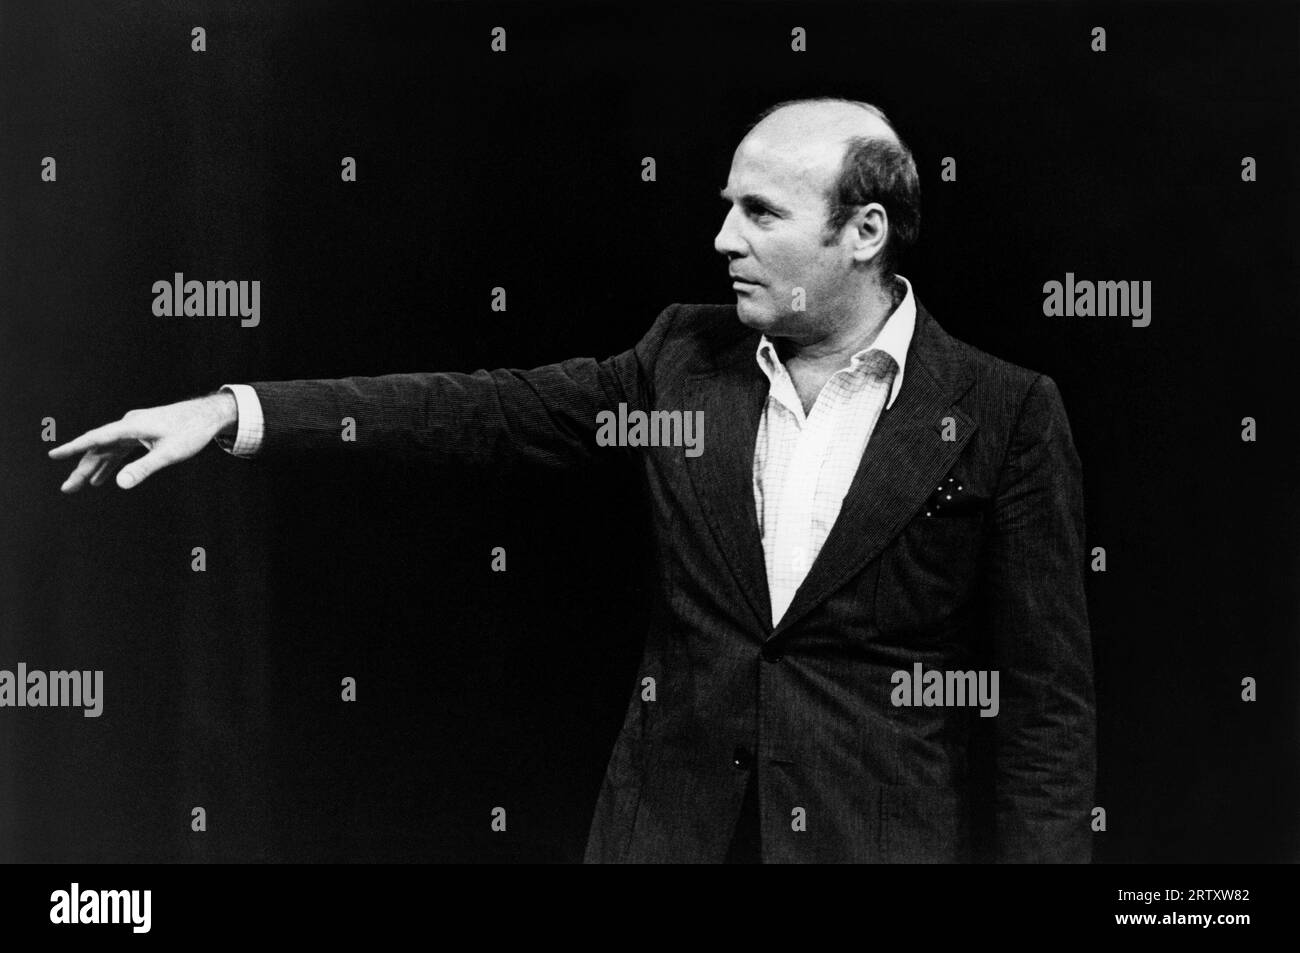 Hans Werner Henze directing at a rehearsal of his opera WE COME TO THE RIVER at the Royal Opera, London WC2 in 1976  text: Edward Bond  assistant director: David Pountney Stock Photo